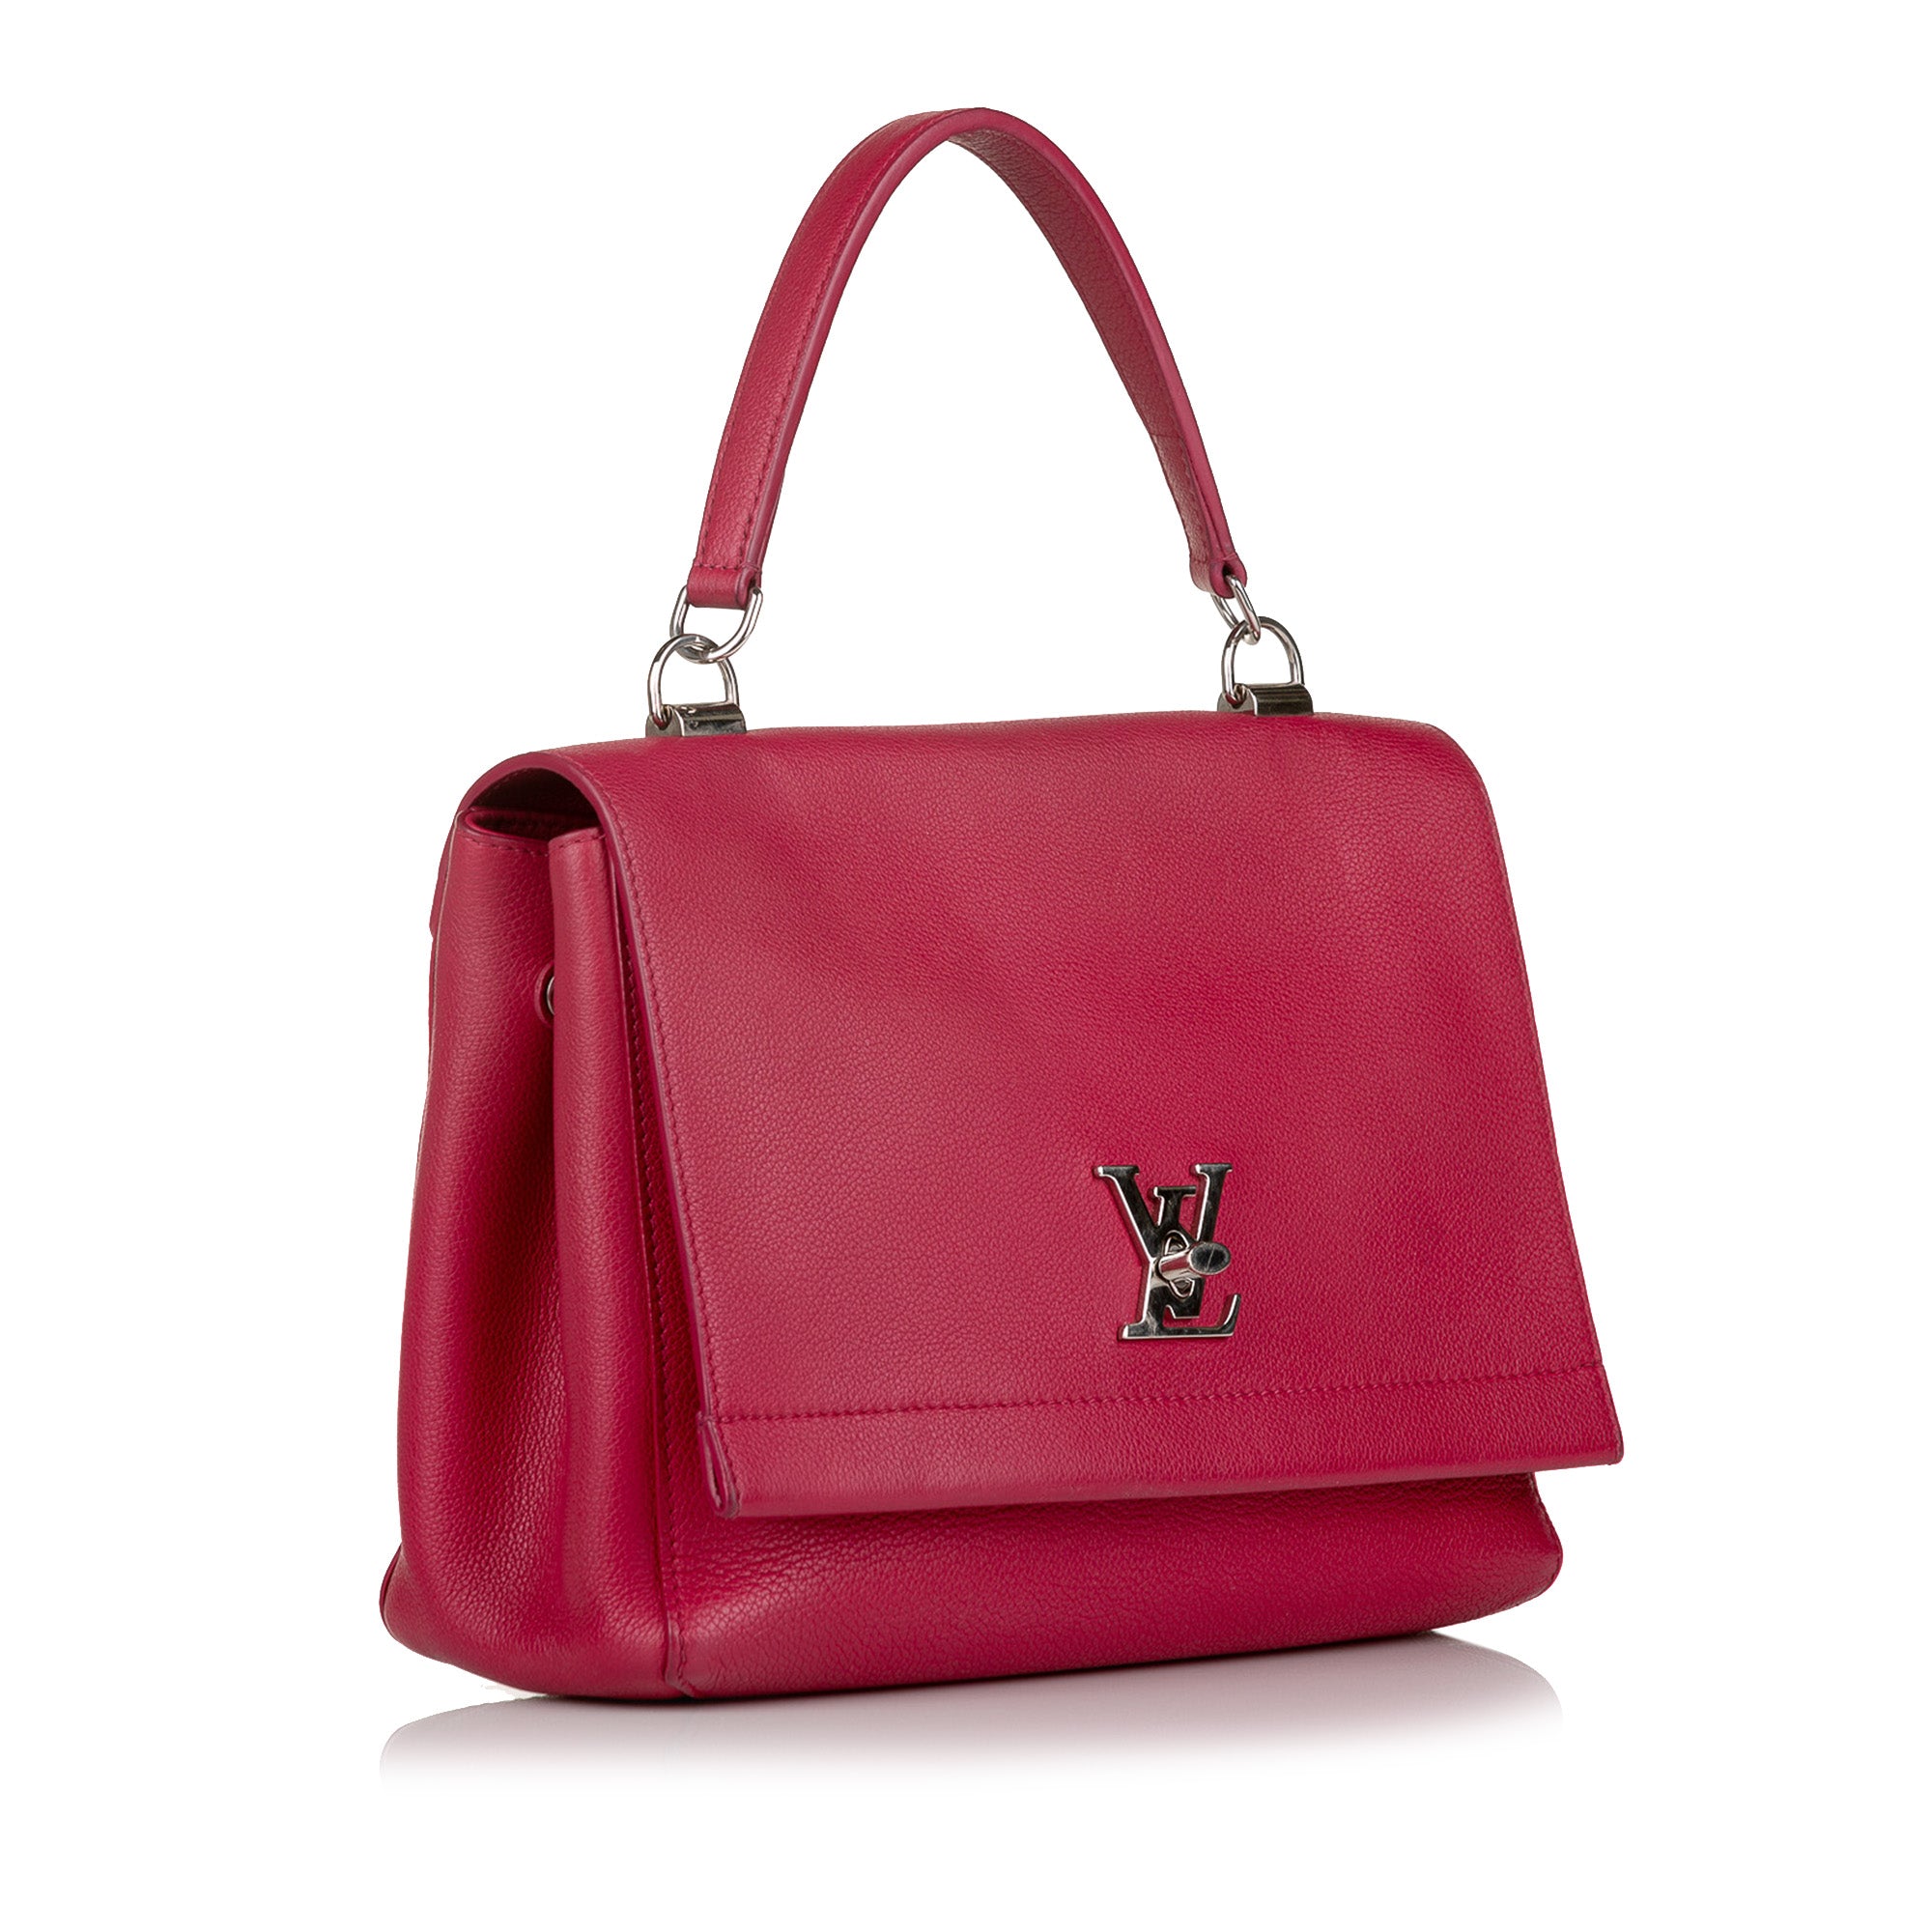 Louis Vuitton - Authenticated Lockme Handbag - Leather Red for Women, Very Good Condition